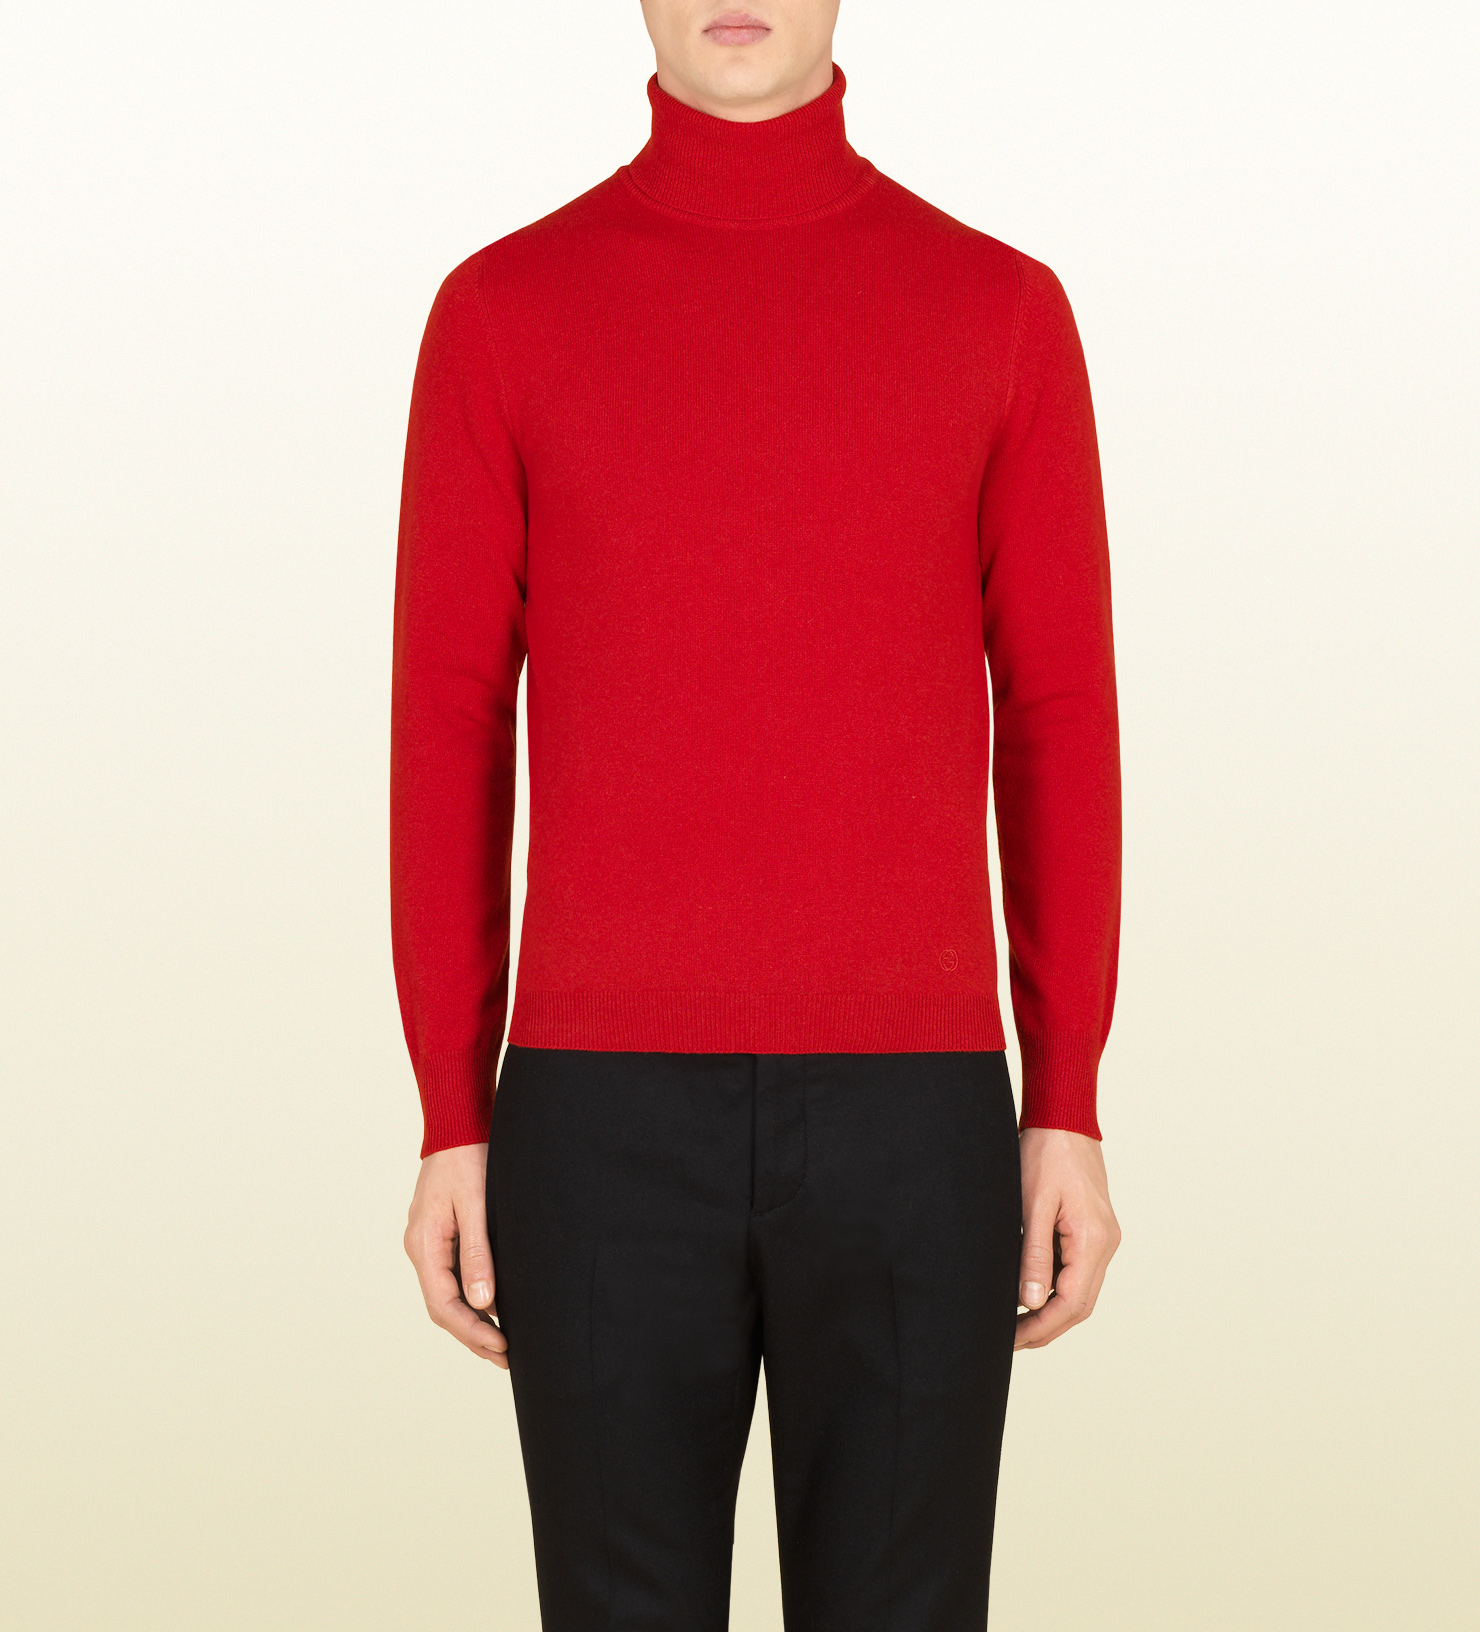 Mens Red Cashmere Turtleneck Sweater - Cardigan With Buttons